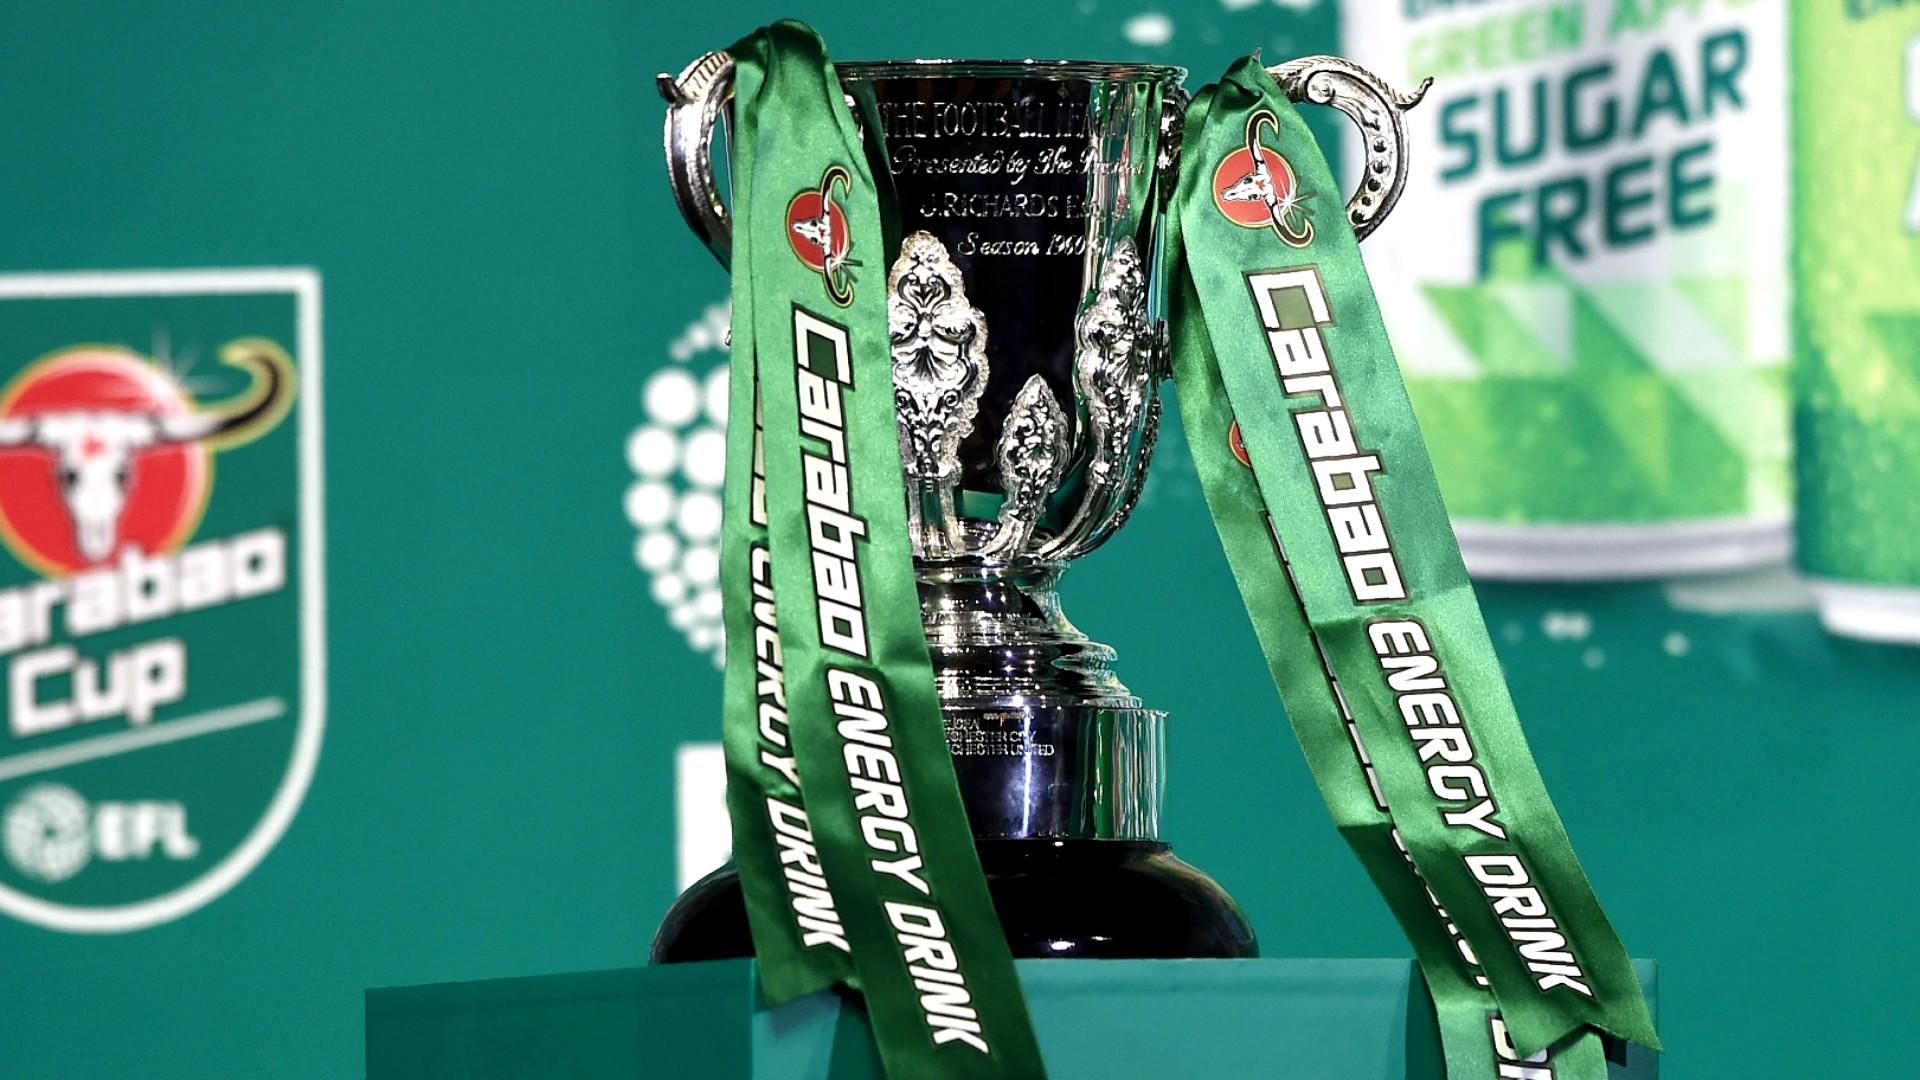 Carabao Cup semifinal results, matches, fixtures schedule and teams qualified for 2023 EFL Cup